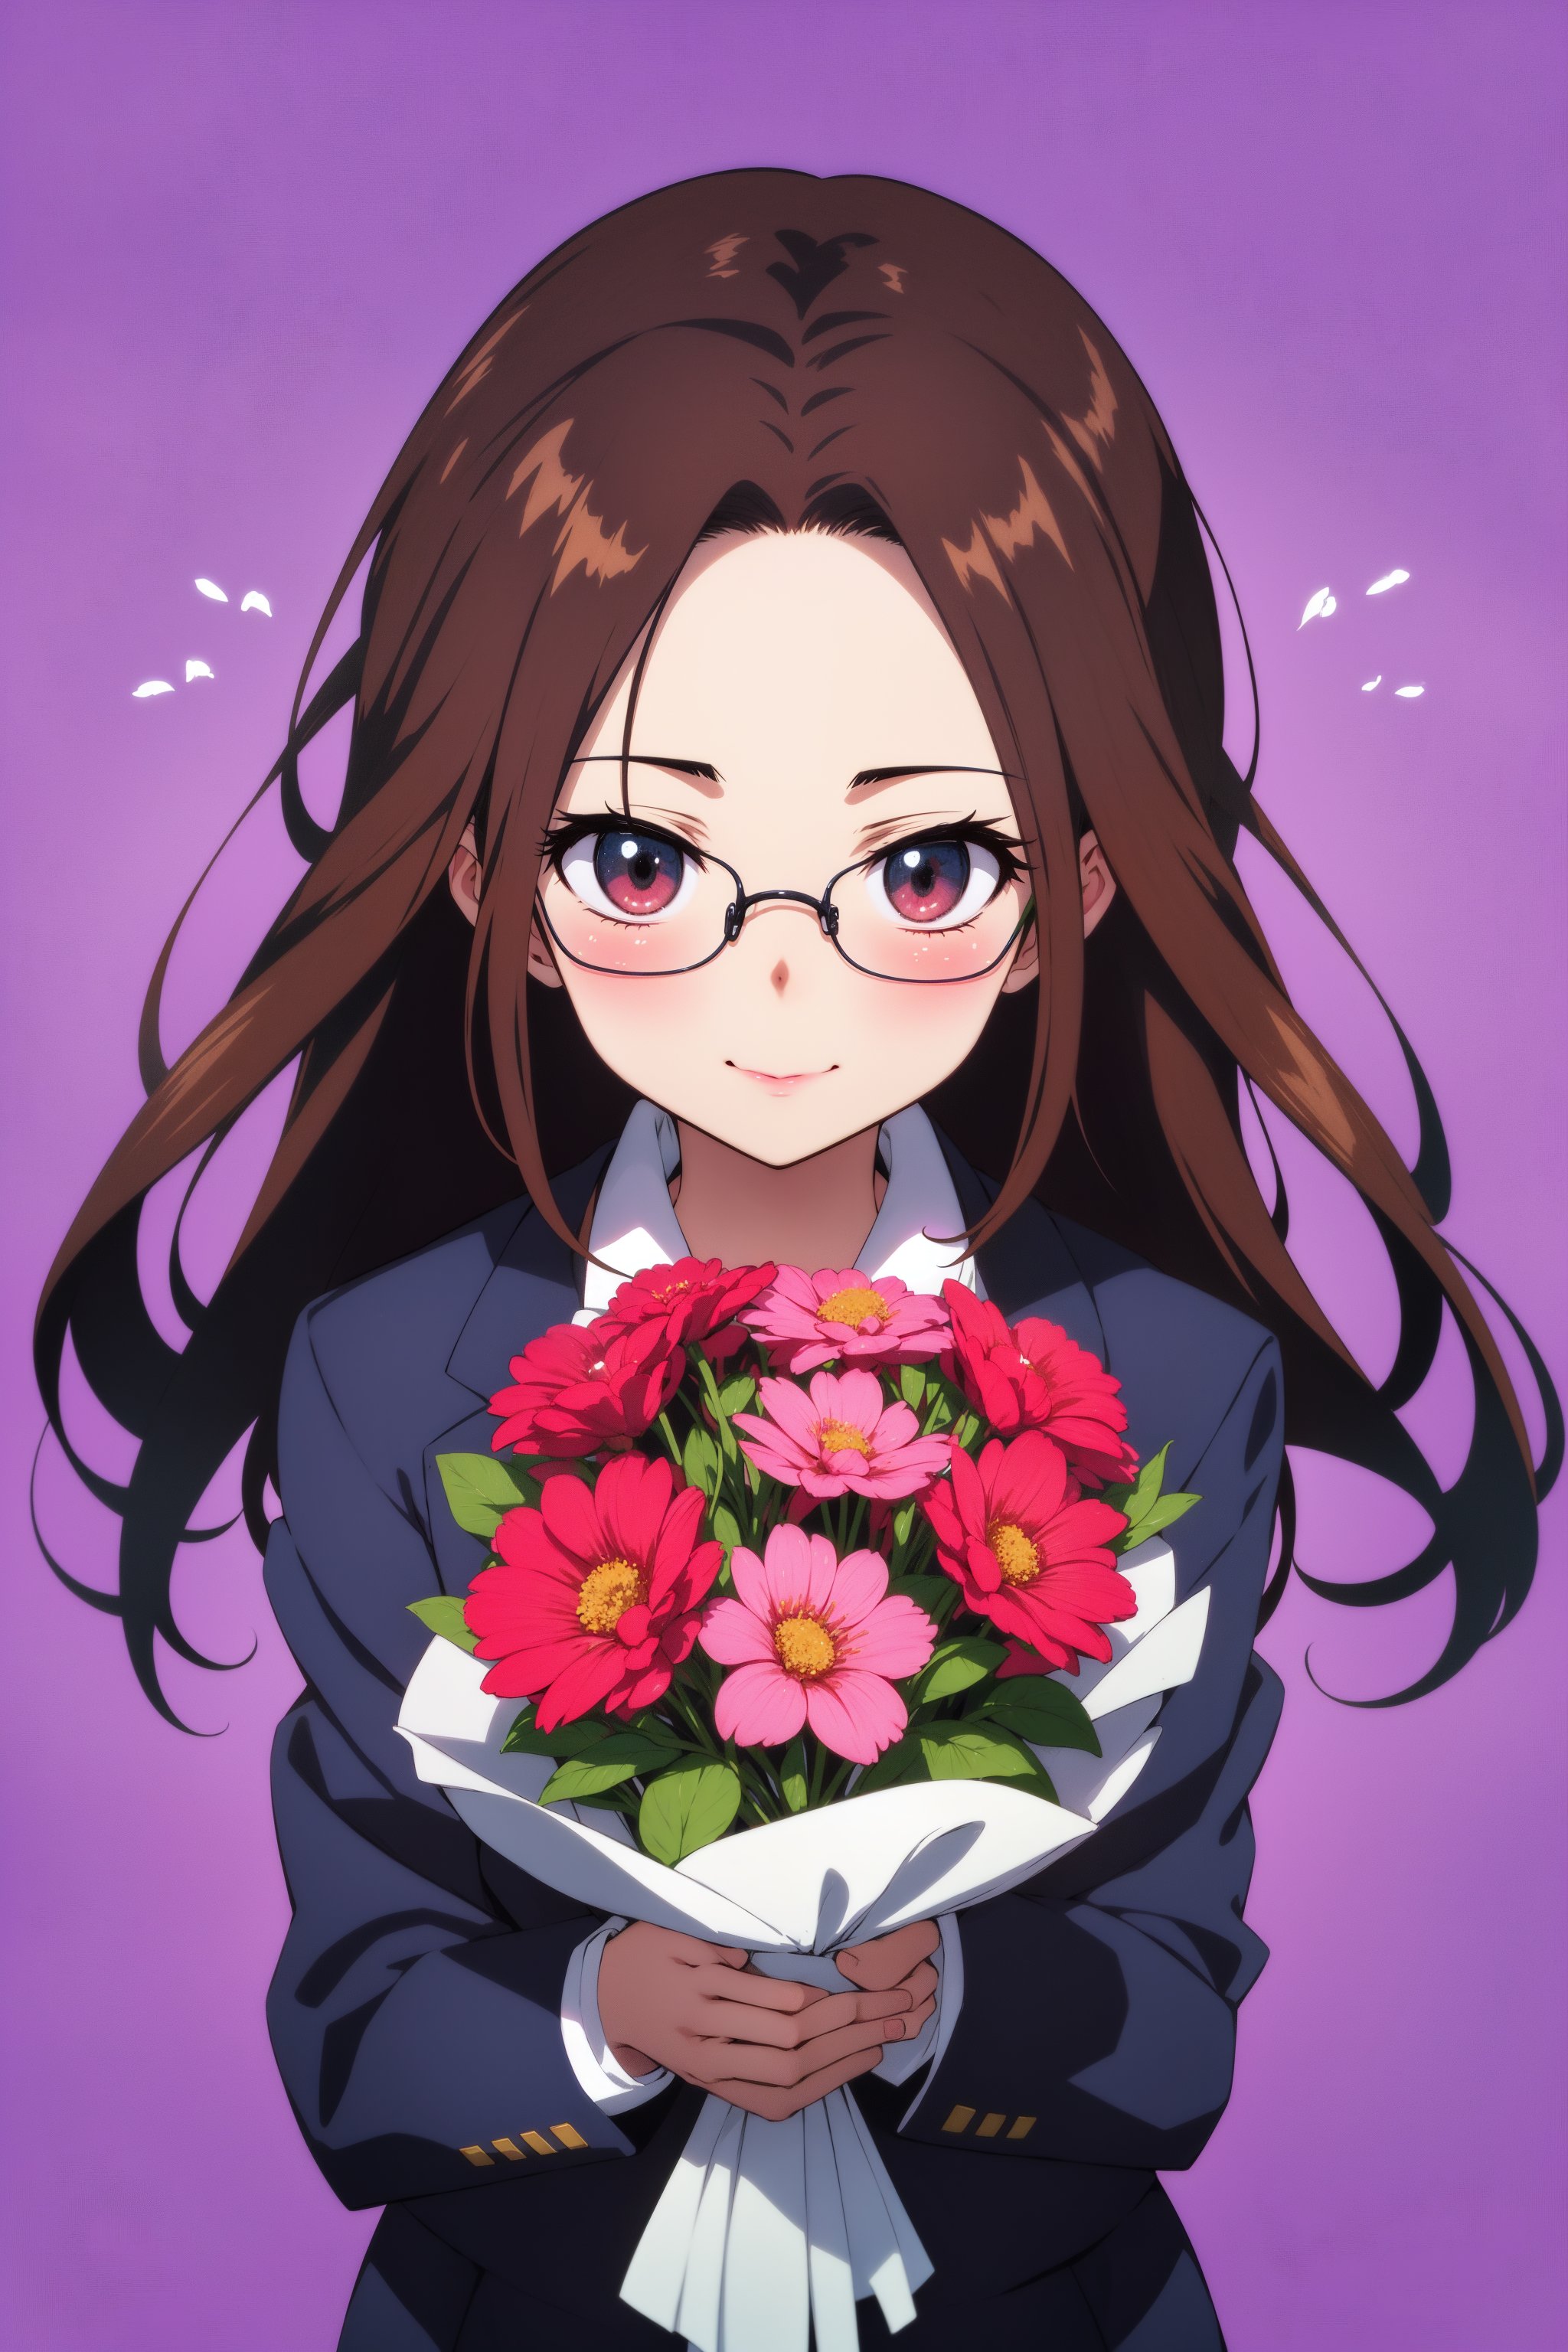 (anime:1.5)
best quality,  masterpiece,  ultra high res,  RAW photo
1girl,  (suit:1.3),  brown_eyes,  black_hair,  straight hair,  lips,  (forehead:1.3),  cute,  medium breasts,  plump,  petite,  loli,  glasses,              
,  closed mouth,  convergent strabismus,  bashful,  shy,  blushing,  smile


BREAK
morning,  Cheerfully greeting everyone,  colourful background,  Model shooting style

BREAK
(holding a bouquet of flower,  :1.3)
(anime:1.5)(High-contrast)
